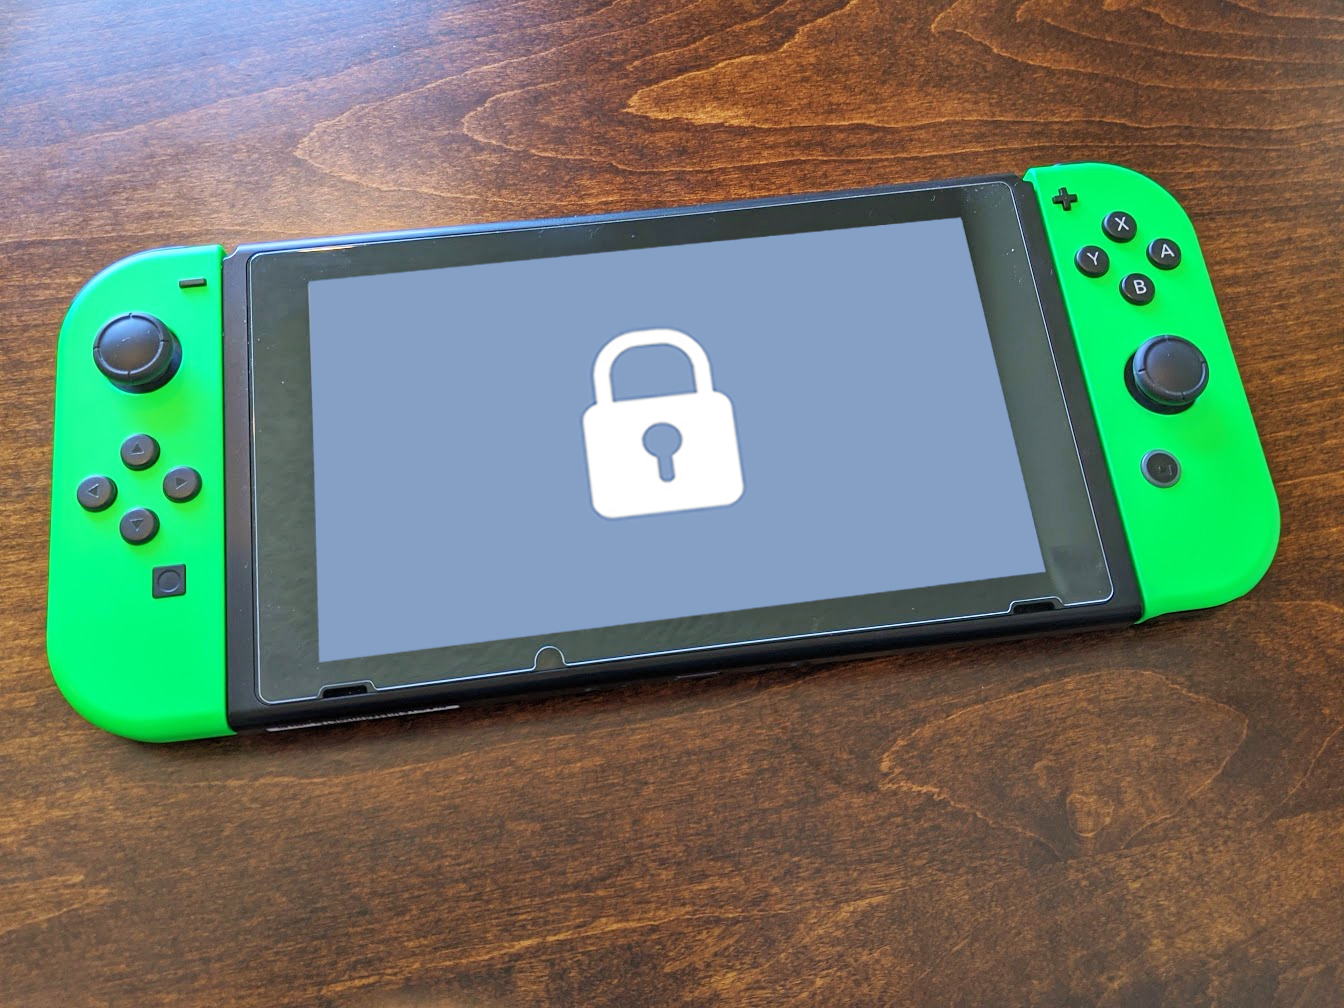 Enable two-factor authentication for your Switch account now – Destructoid